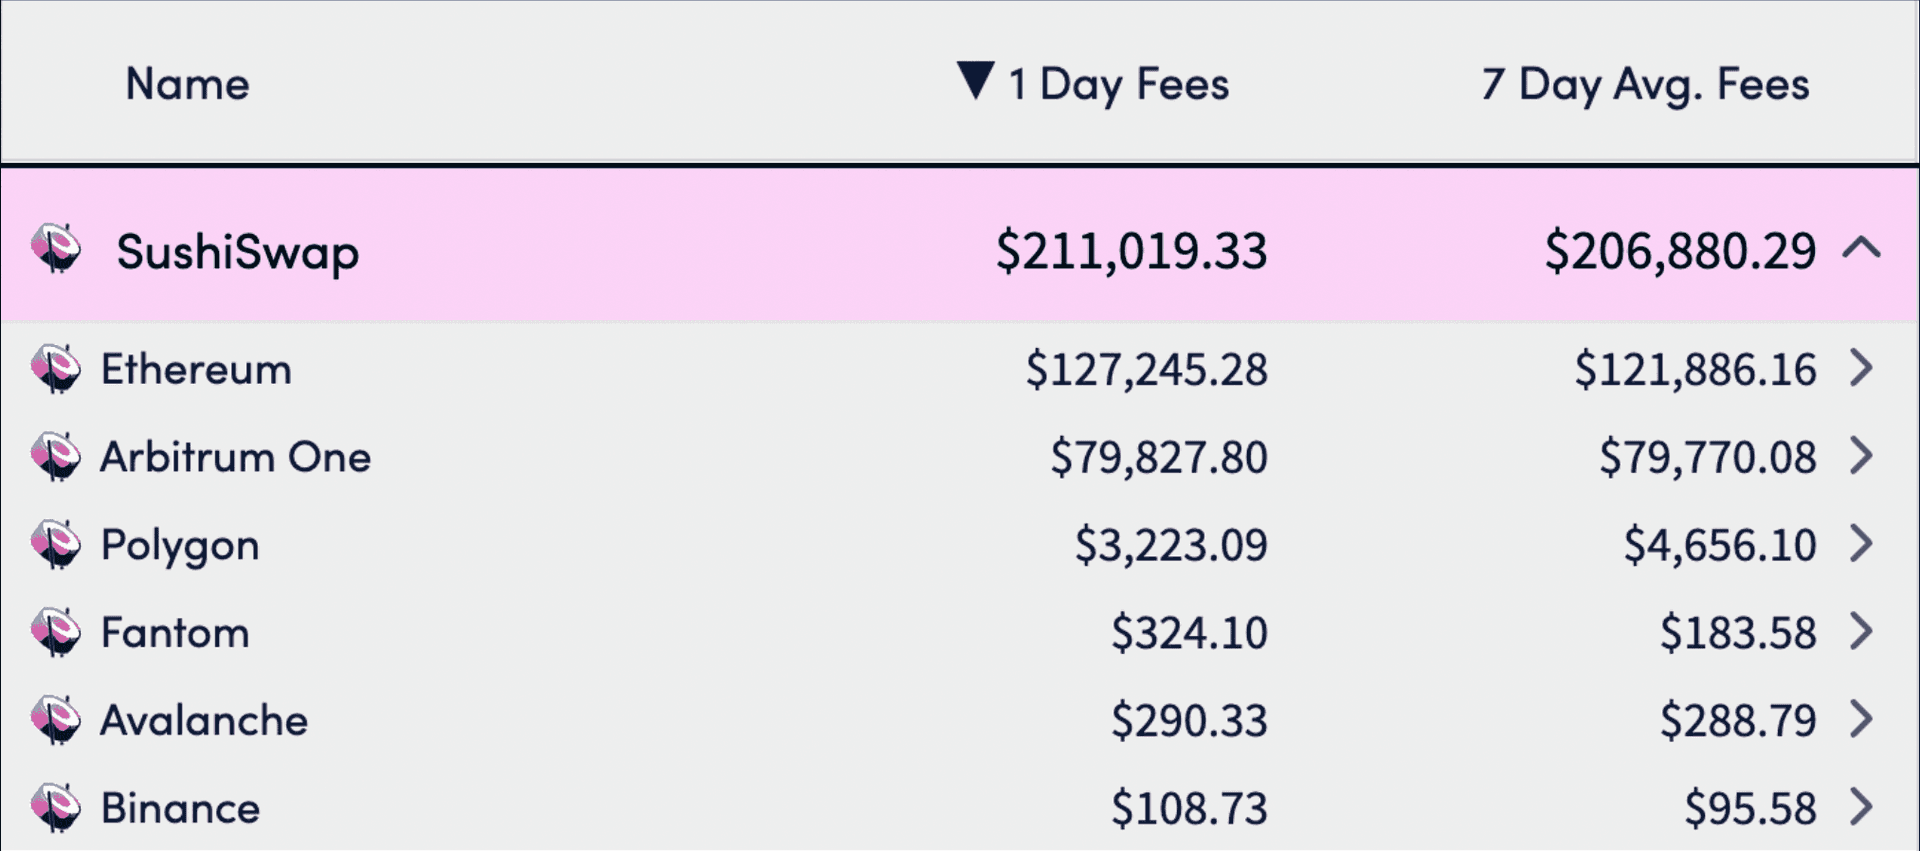 Cryptofees (as of 31 Oct, 2022)